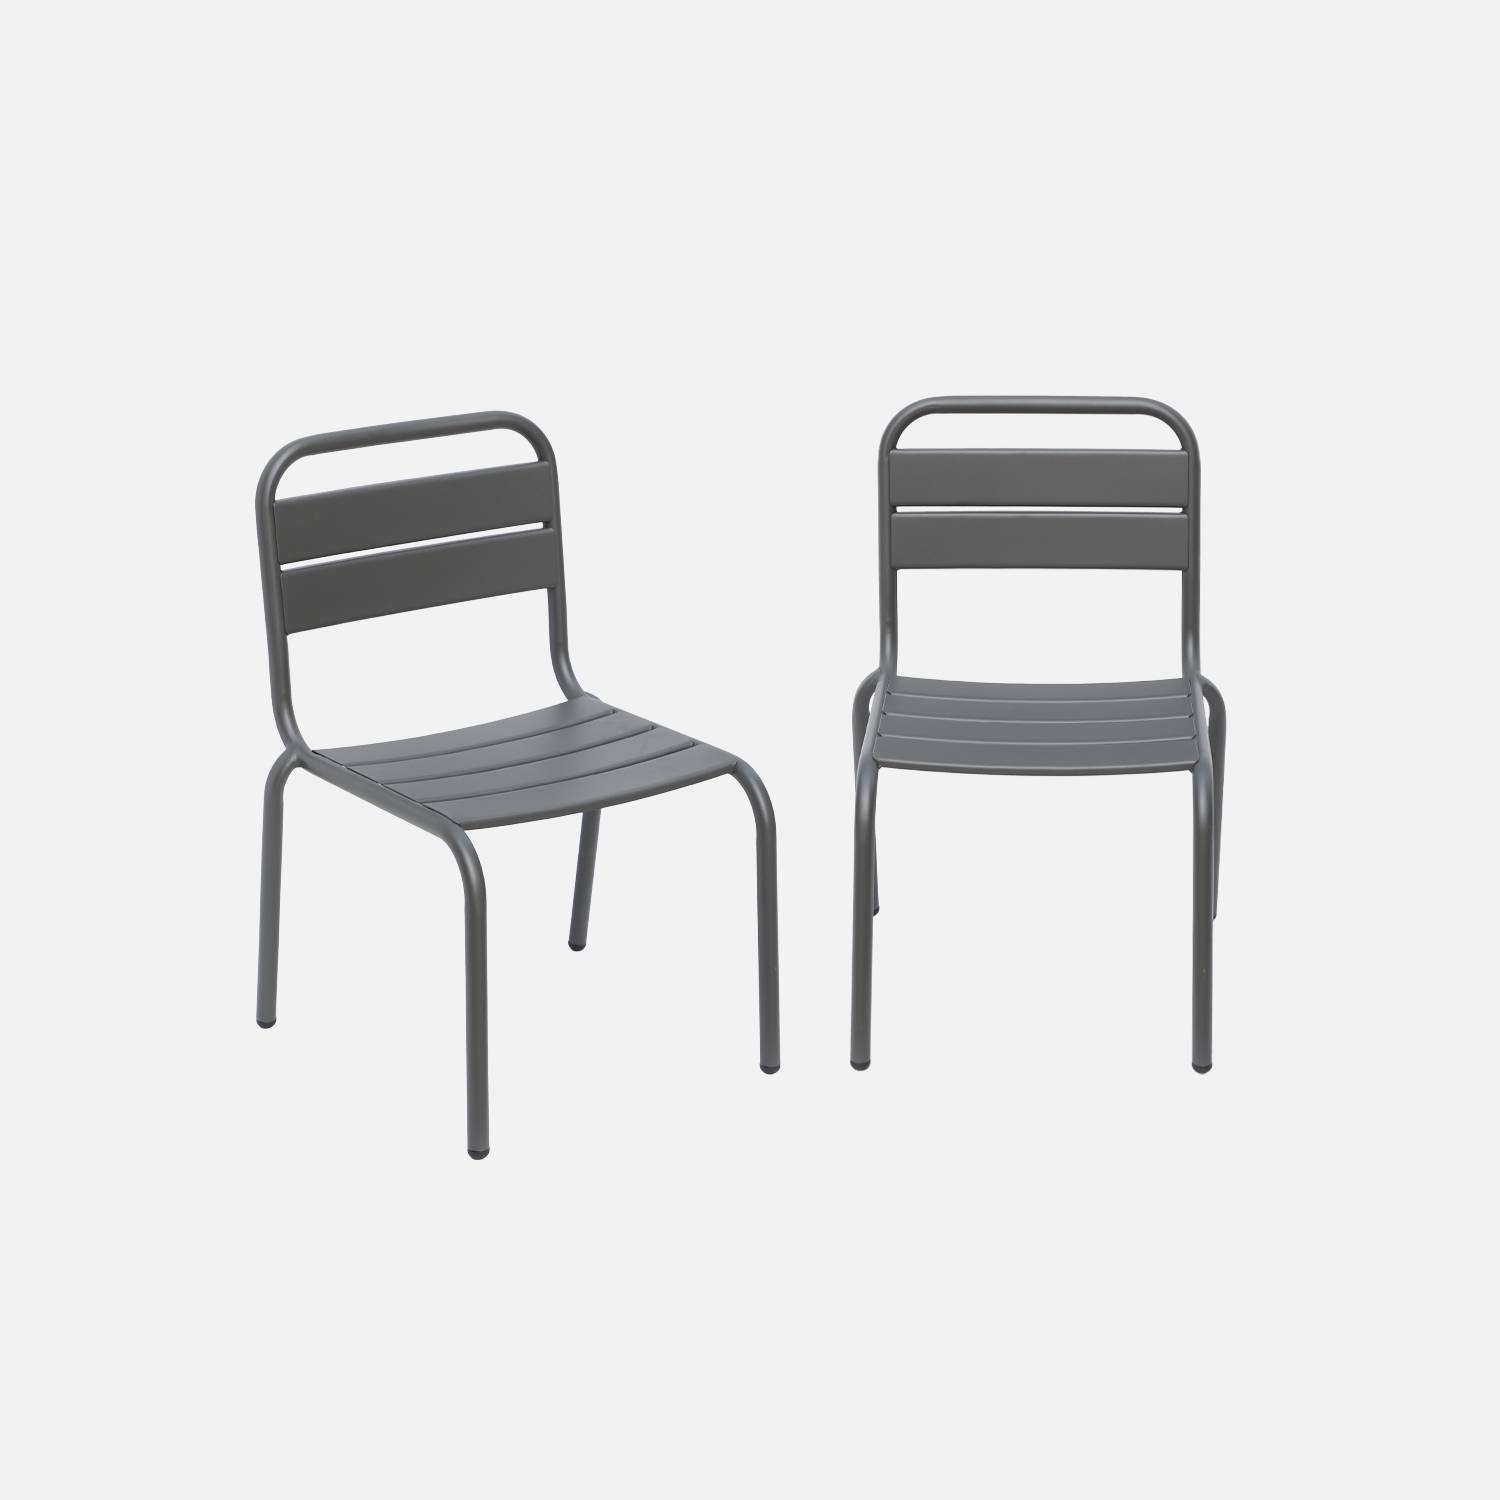 Set of 2 I sweeek anthracite metal chairs for children